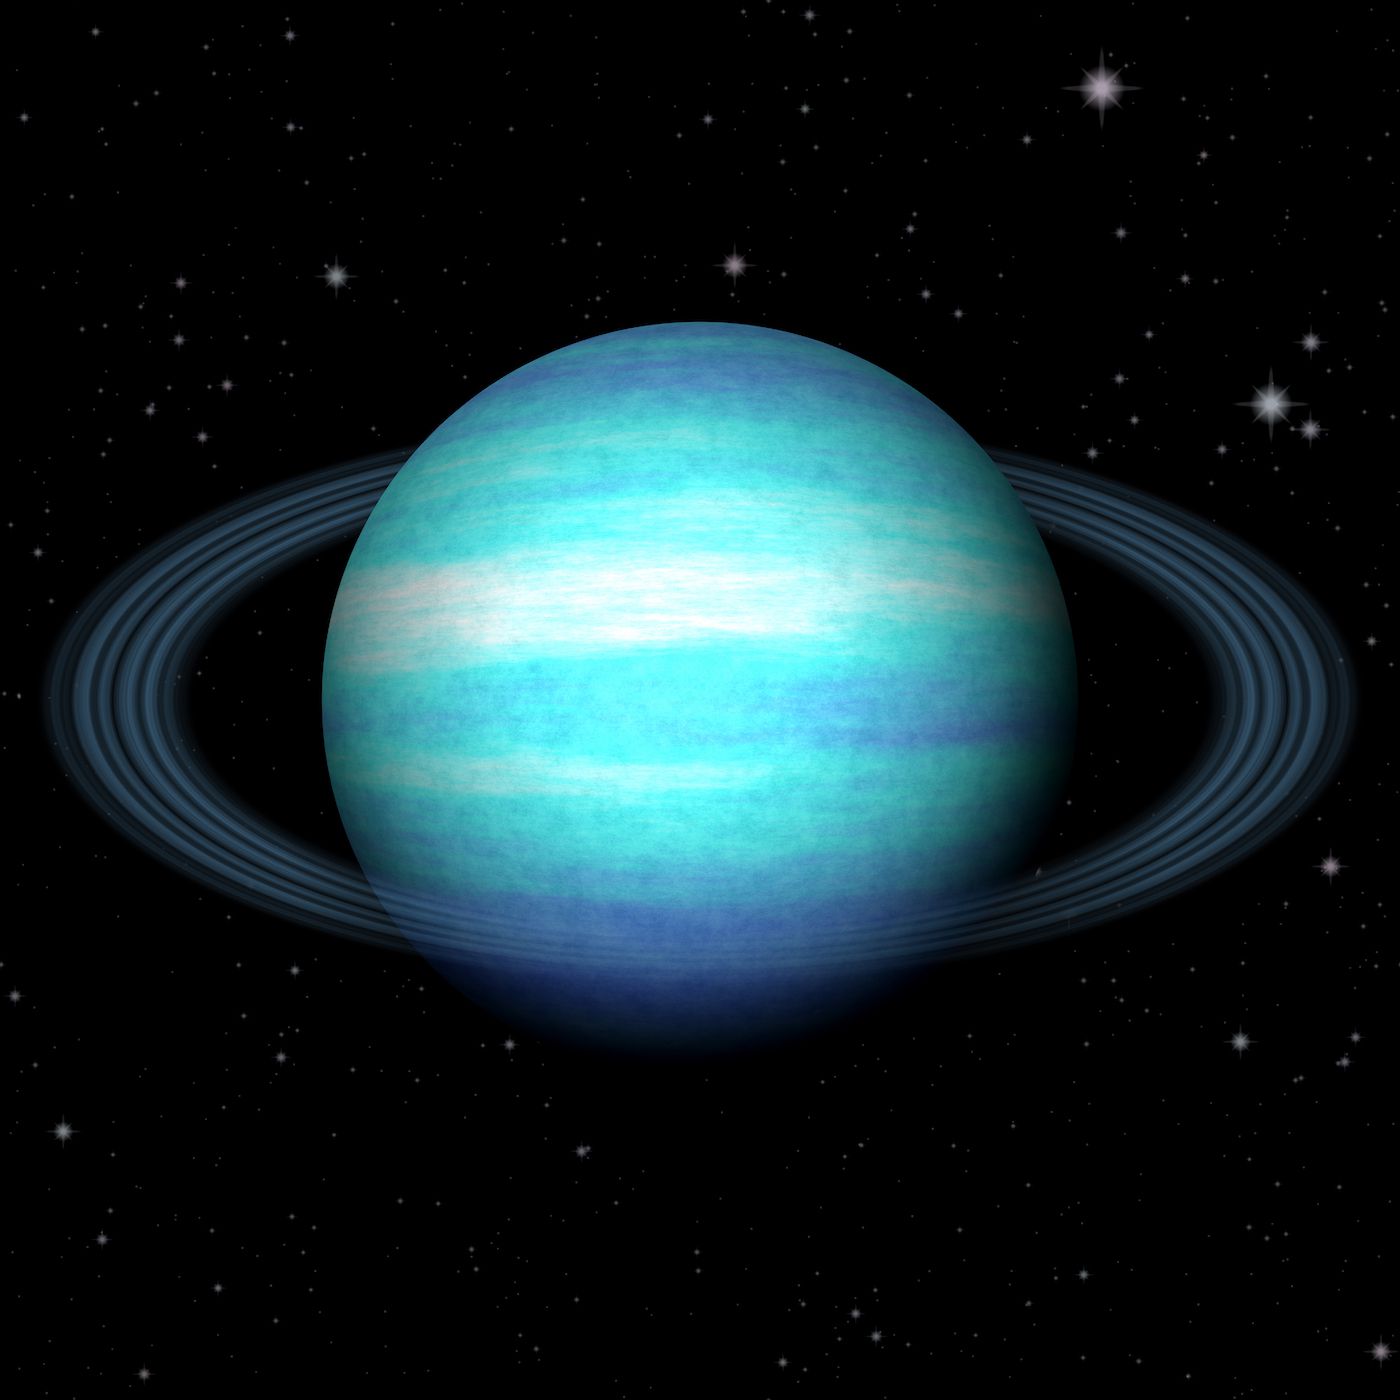 <p class="MsoNormal">Technically, <a href="https://www.universetoday.com/18943/how-should-you-pronounce-uranus/">either pronunciation</a> of the word “Uranus” is correct, including the one with the long “A” sound. But boy, your science teacher will thank you for making the job a little easier by pronouncing it the first way. Think of it as a passive form of grade-grubbing.</p>